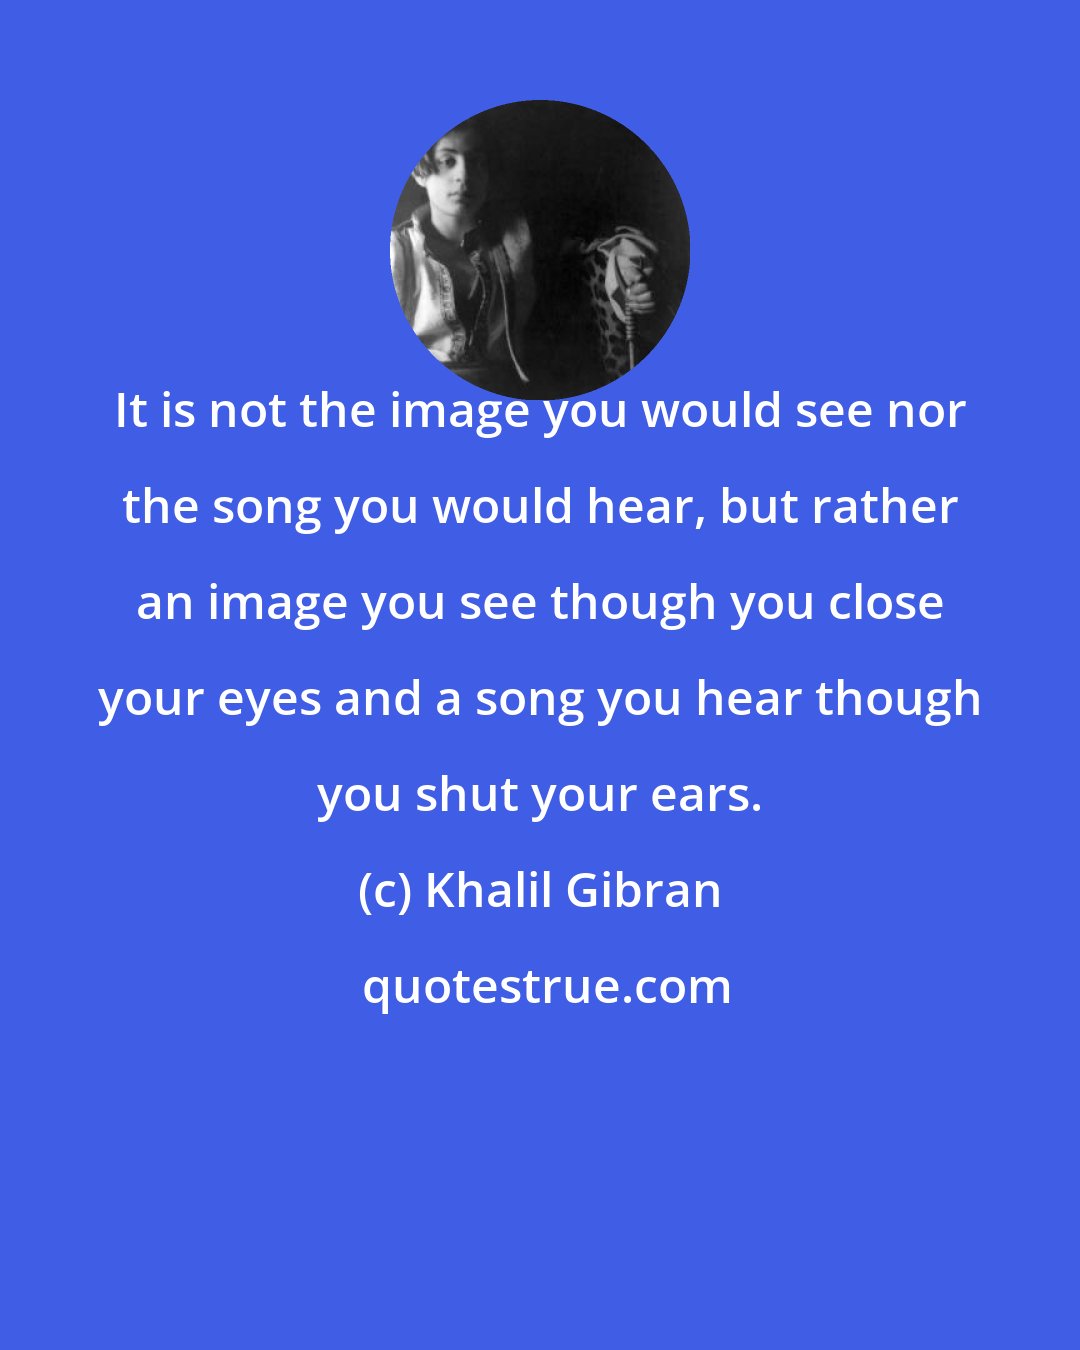 Khalil Gibran: It is not the image you would see nor the song you would hear, but rather an image you see though you close your eyes and a song you hear though you shut your ears.